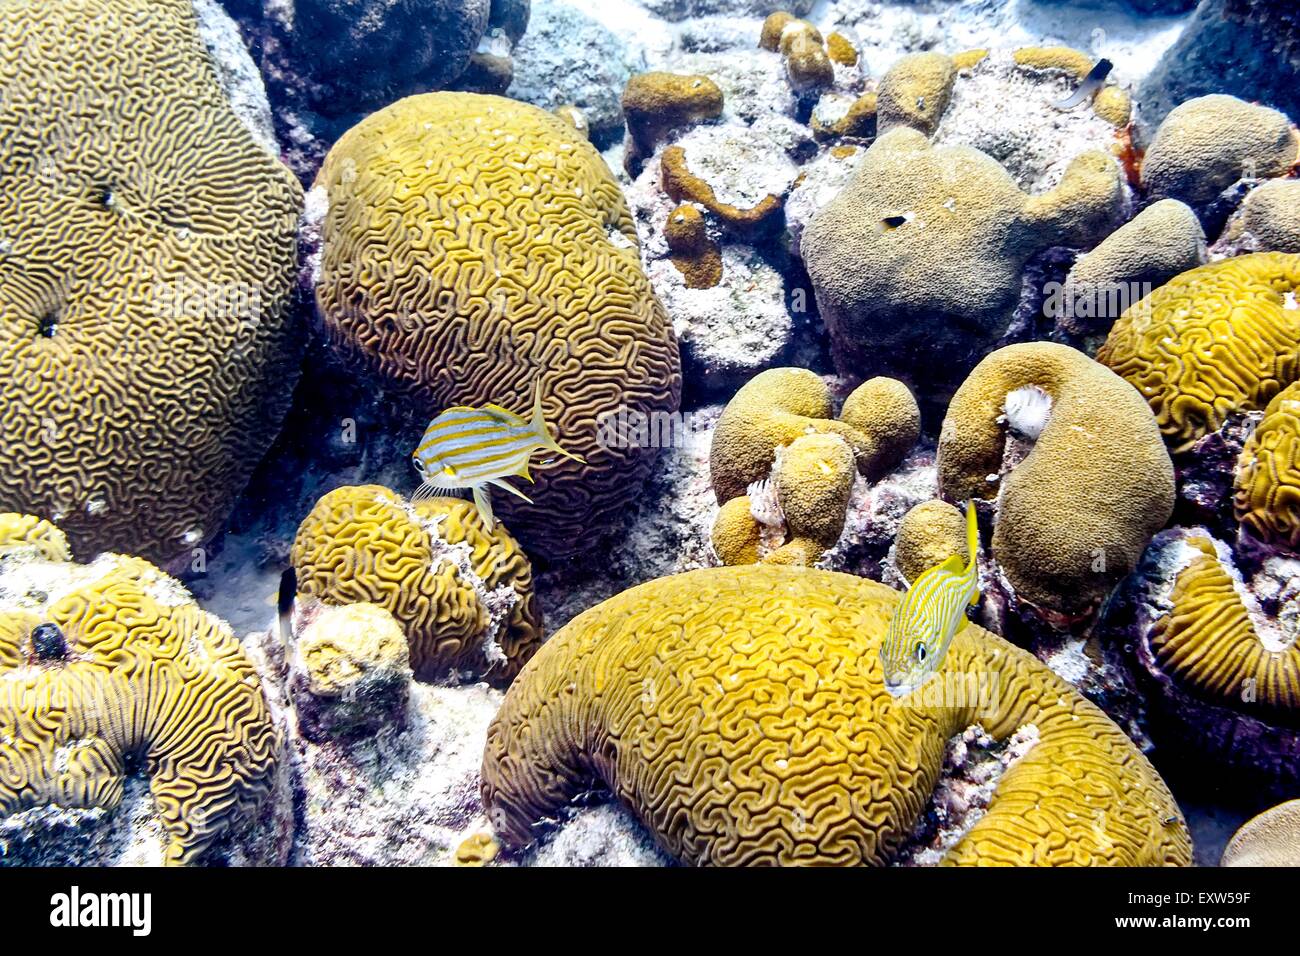 Small Mouth Grunt Swimming Among Brain Corals at Buddy's Reef, Close-up Shot, Bonaire, Netherlands Antilles Stock Photo